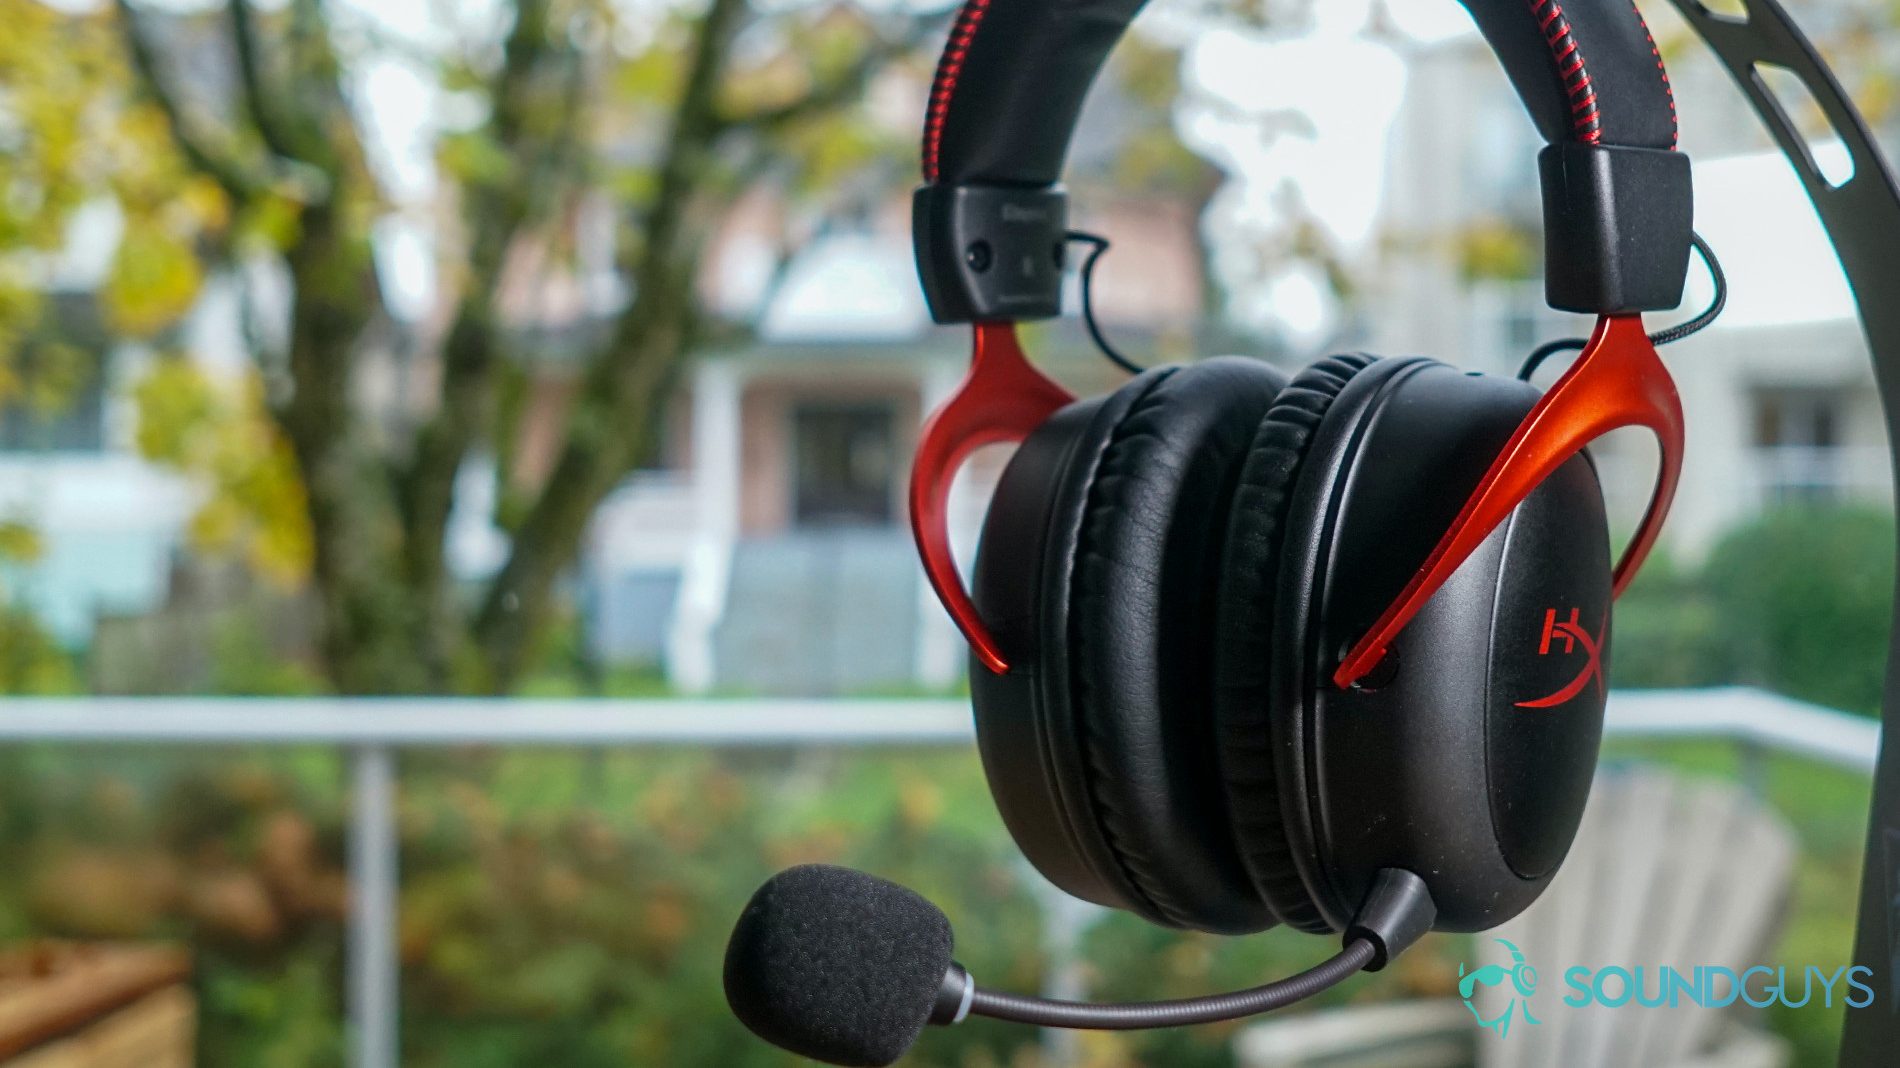 HyperX Cloud II Gaming Headset review: Comfortable all-day audio